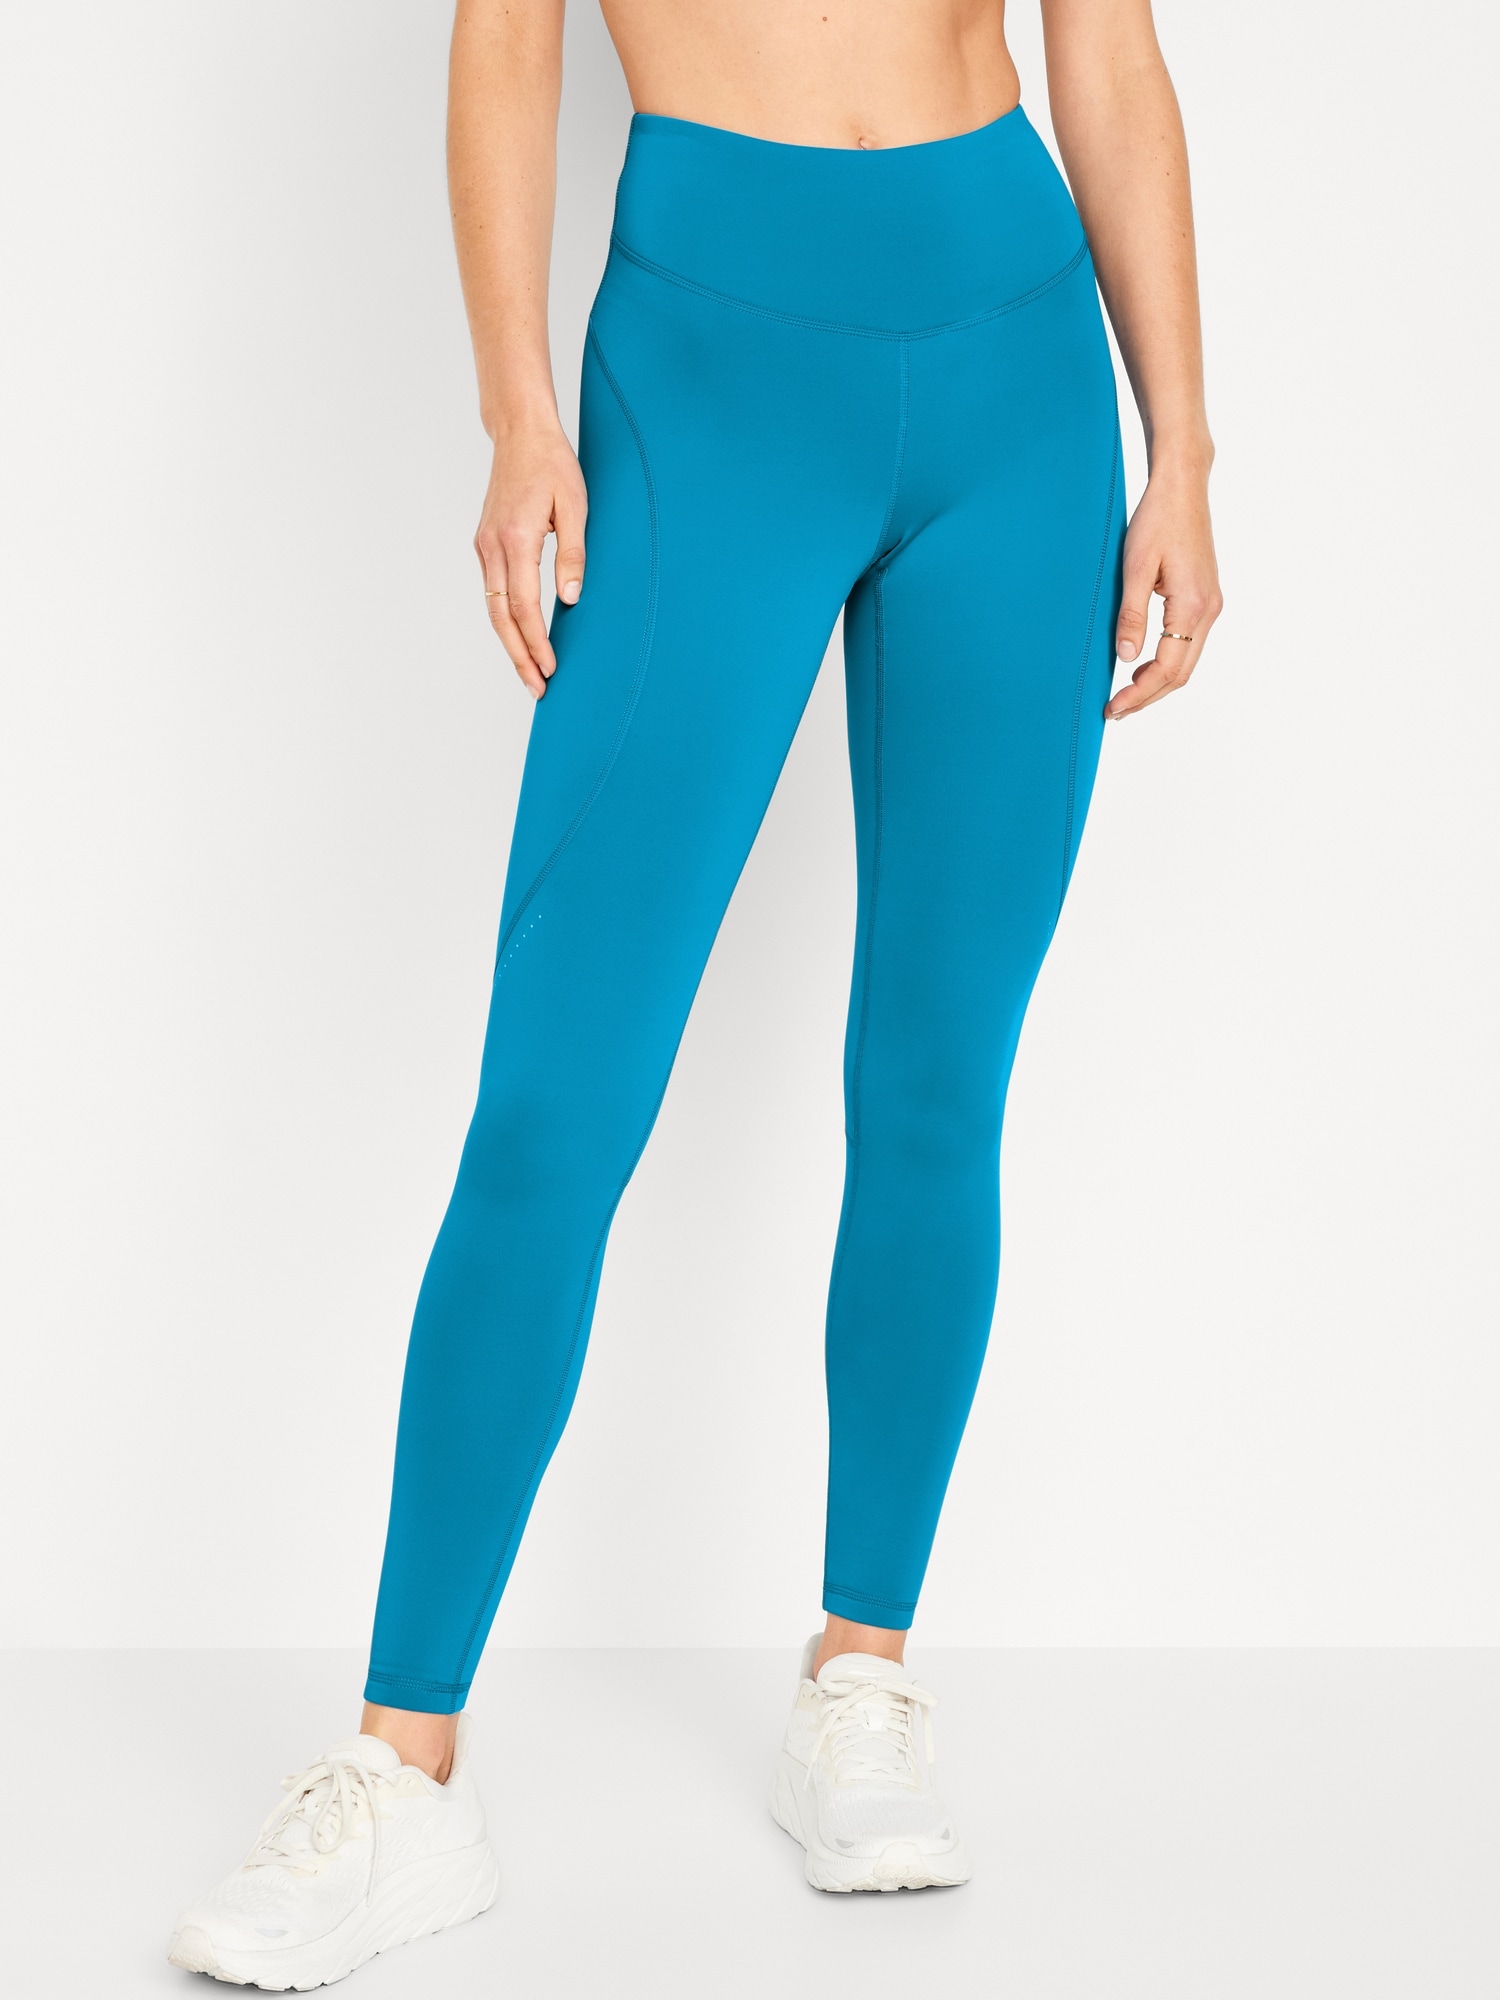 Blue Leggings » Blue, Turquoise & Navy Tights